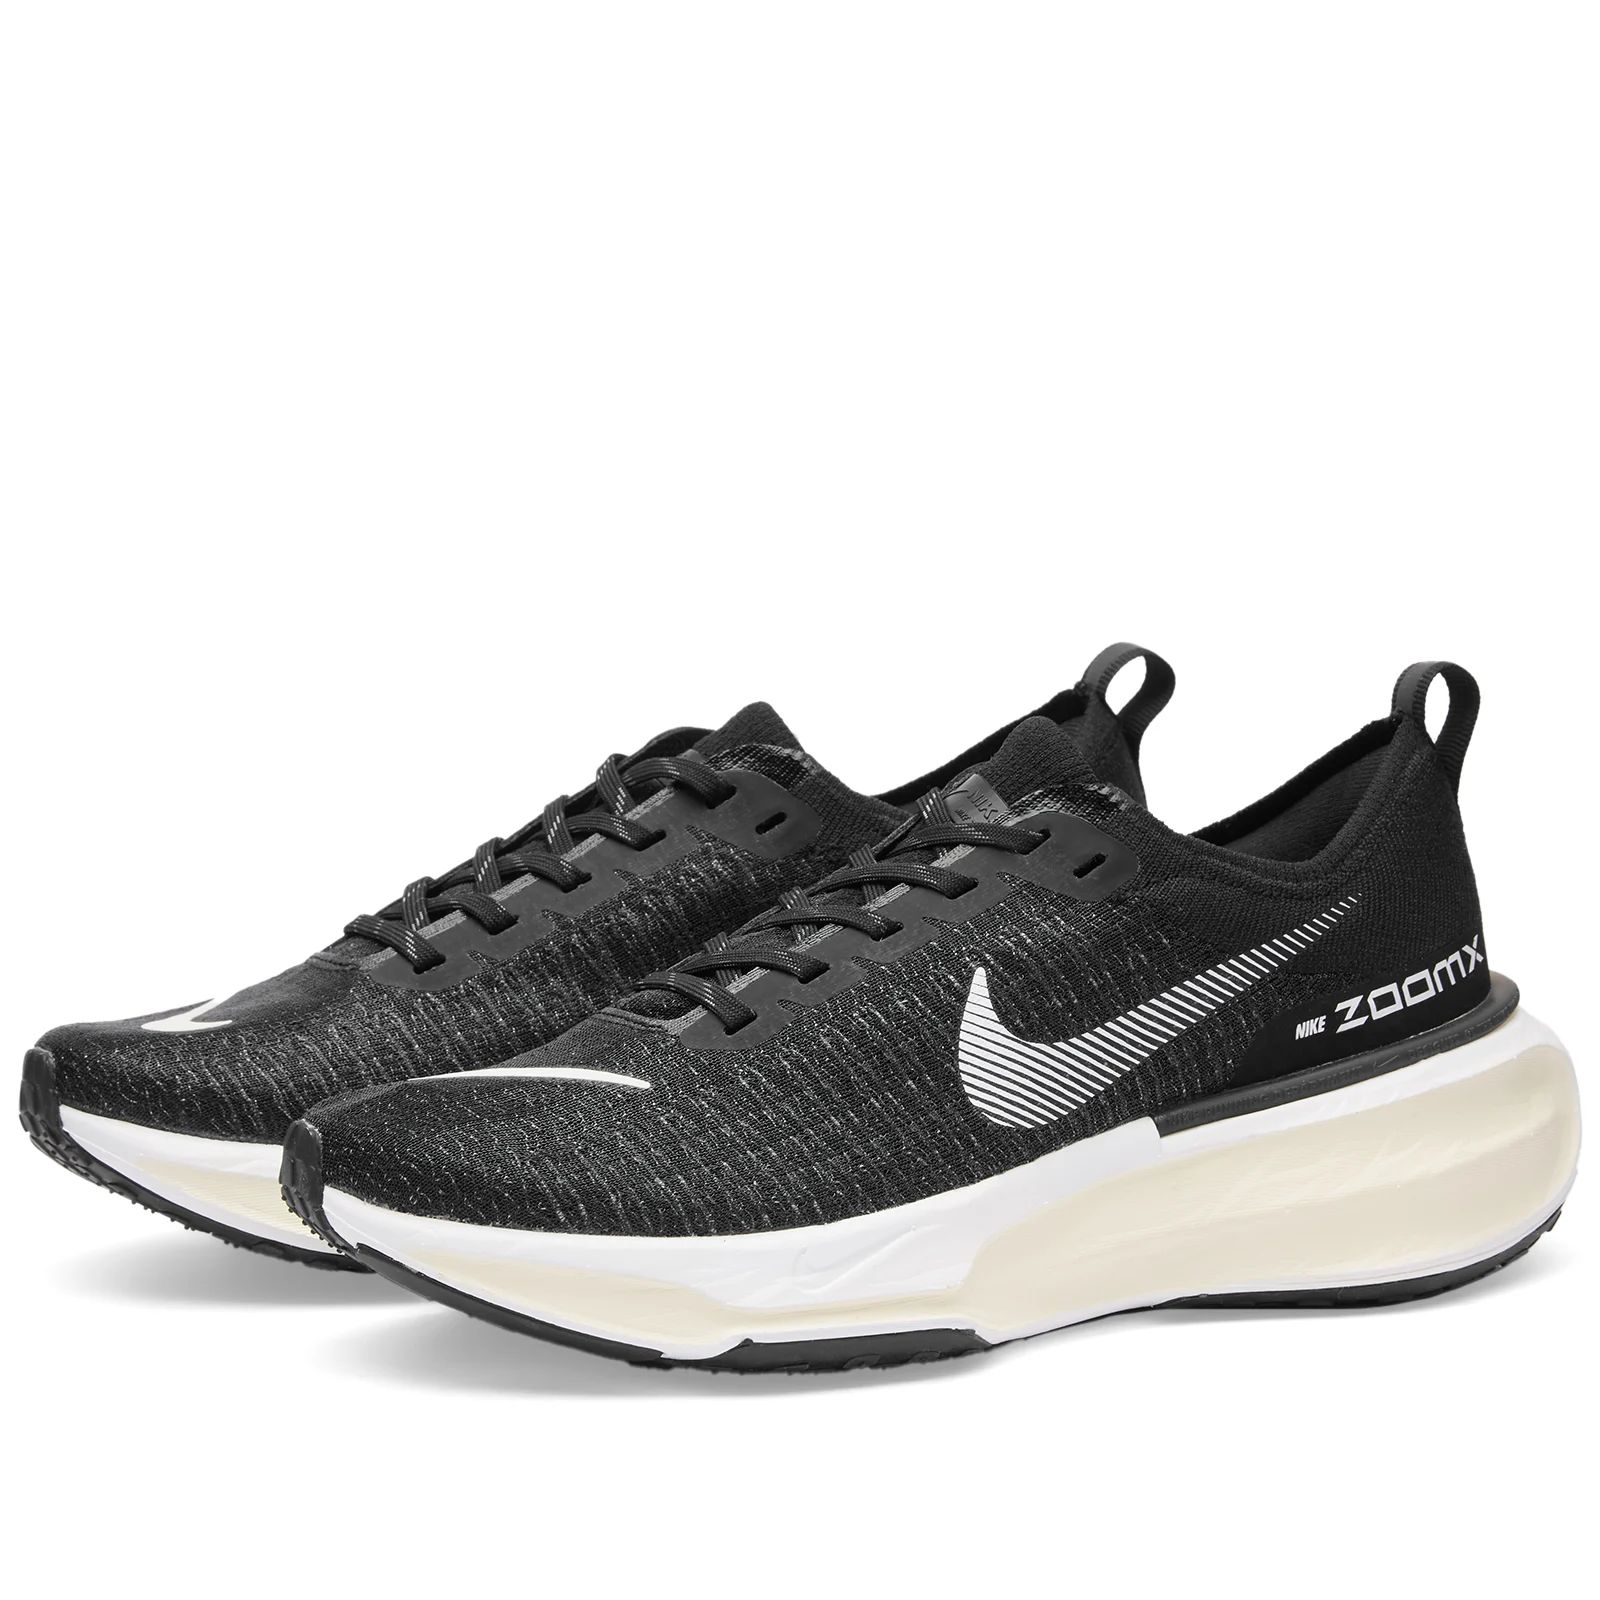 Nike ZoomX Invincible Run Flyknit 3 W | END. Clothing